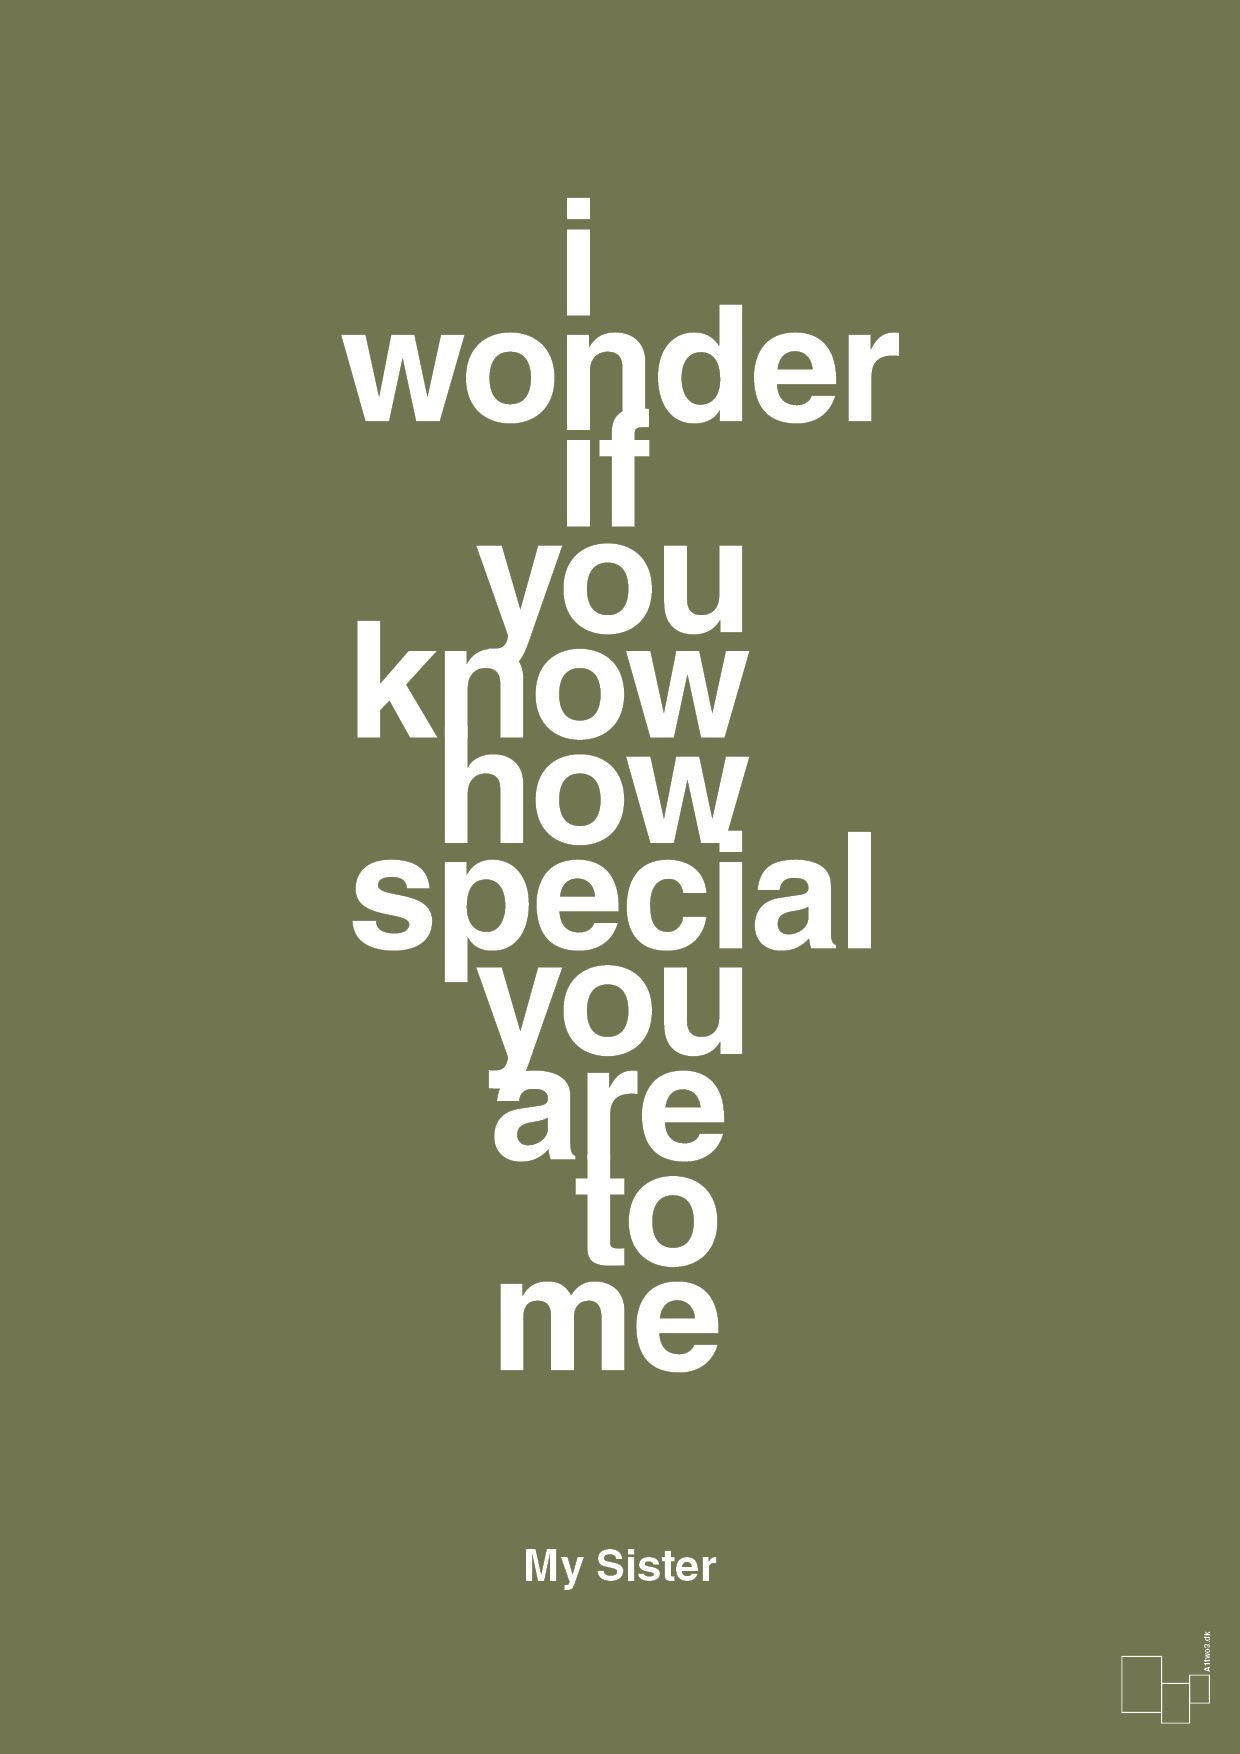 my sister - i wonder if you know how special you are to me - Plakat med Citater i Secret Meadow